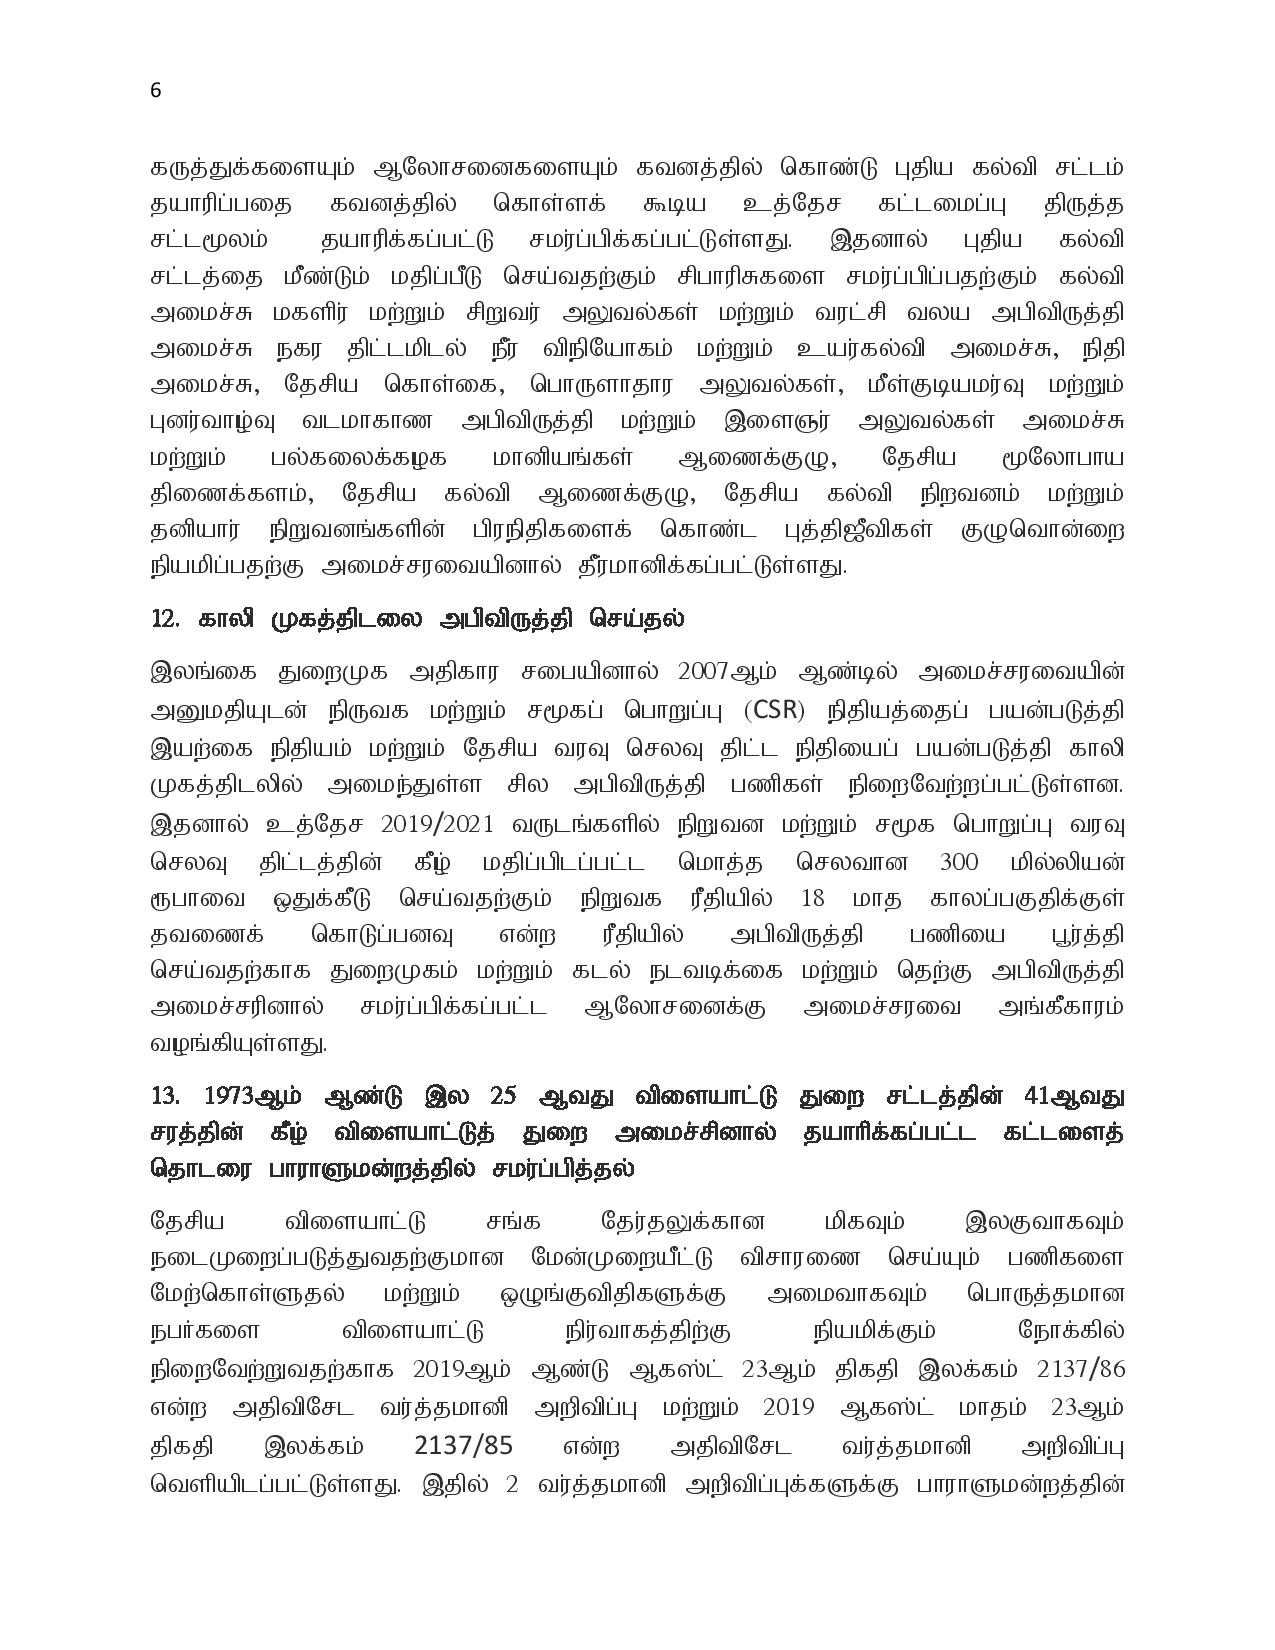 24.09.2019 cabinet page 006